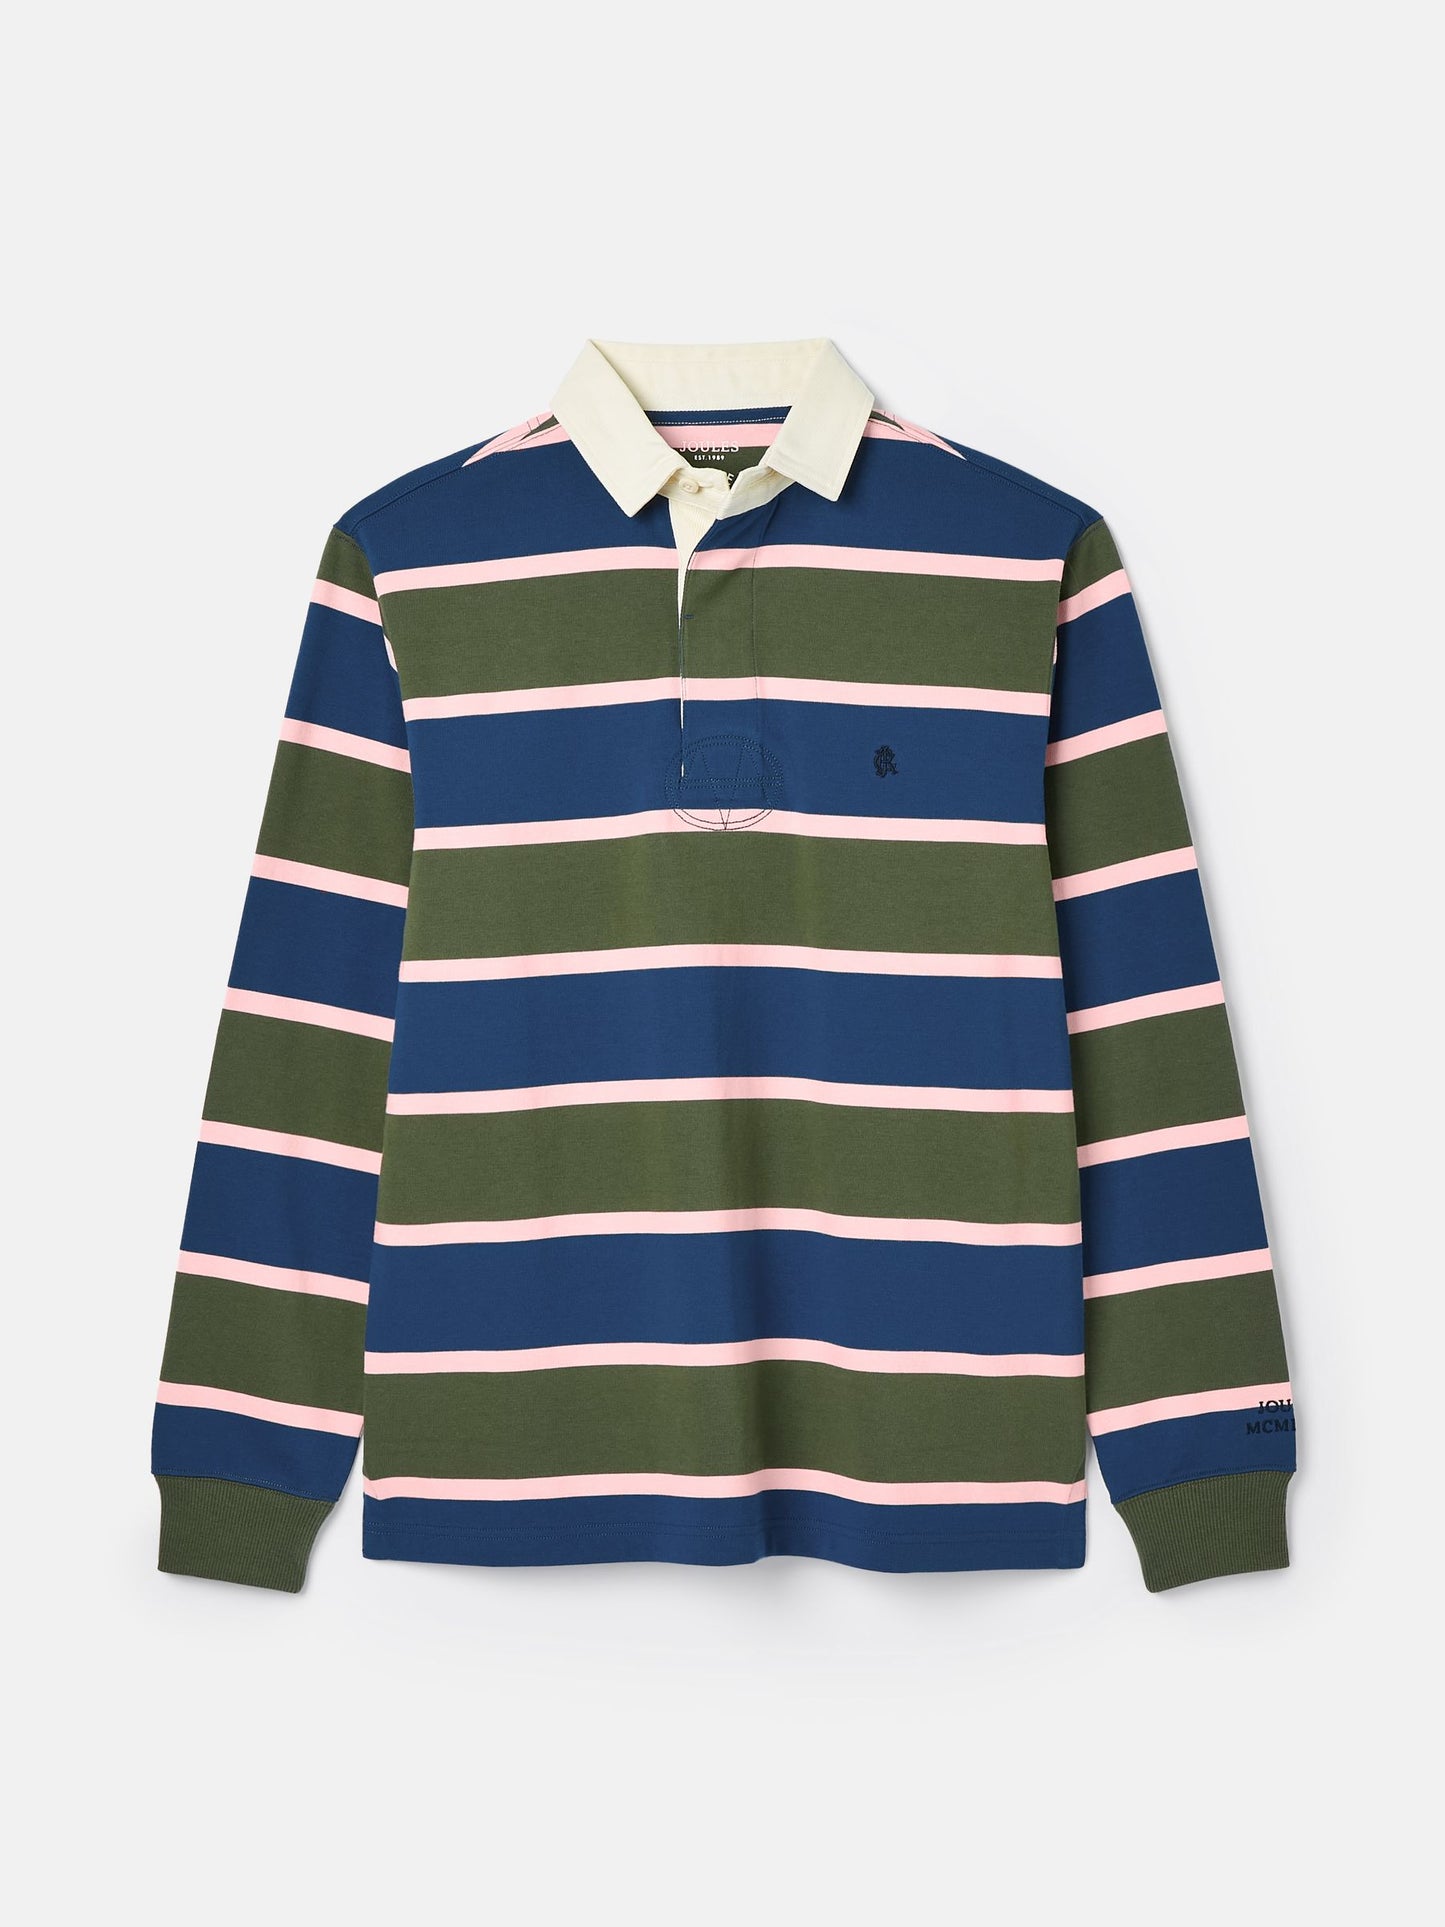 Joules Onside Rugby Shirt